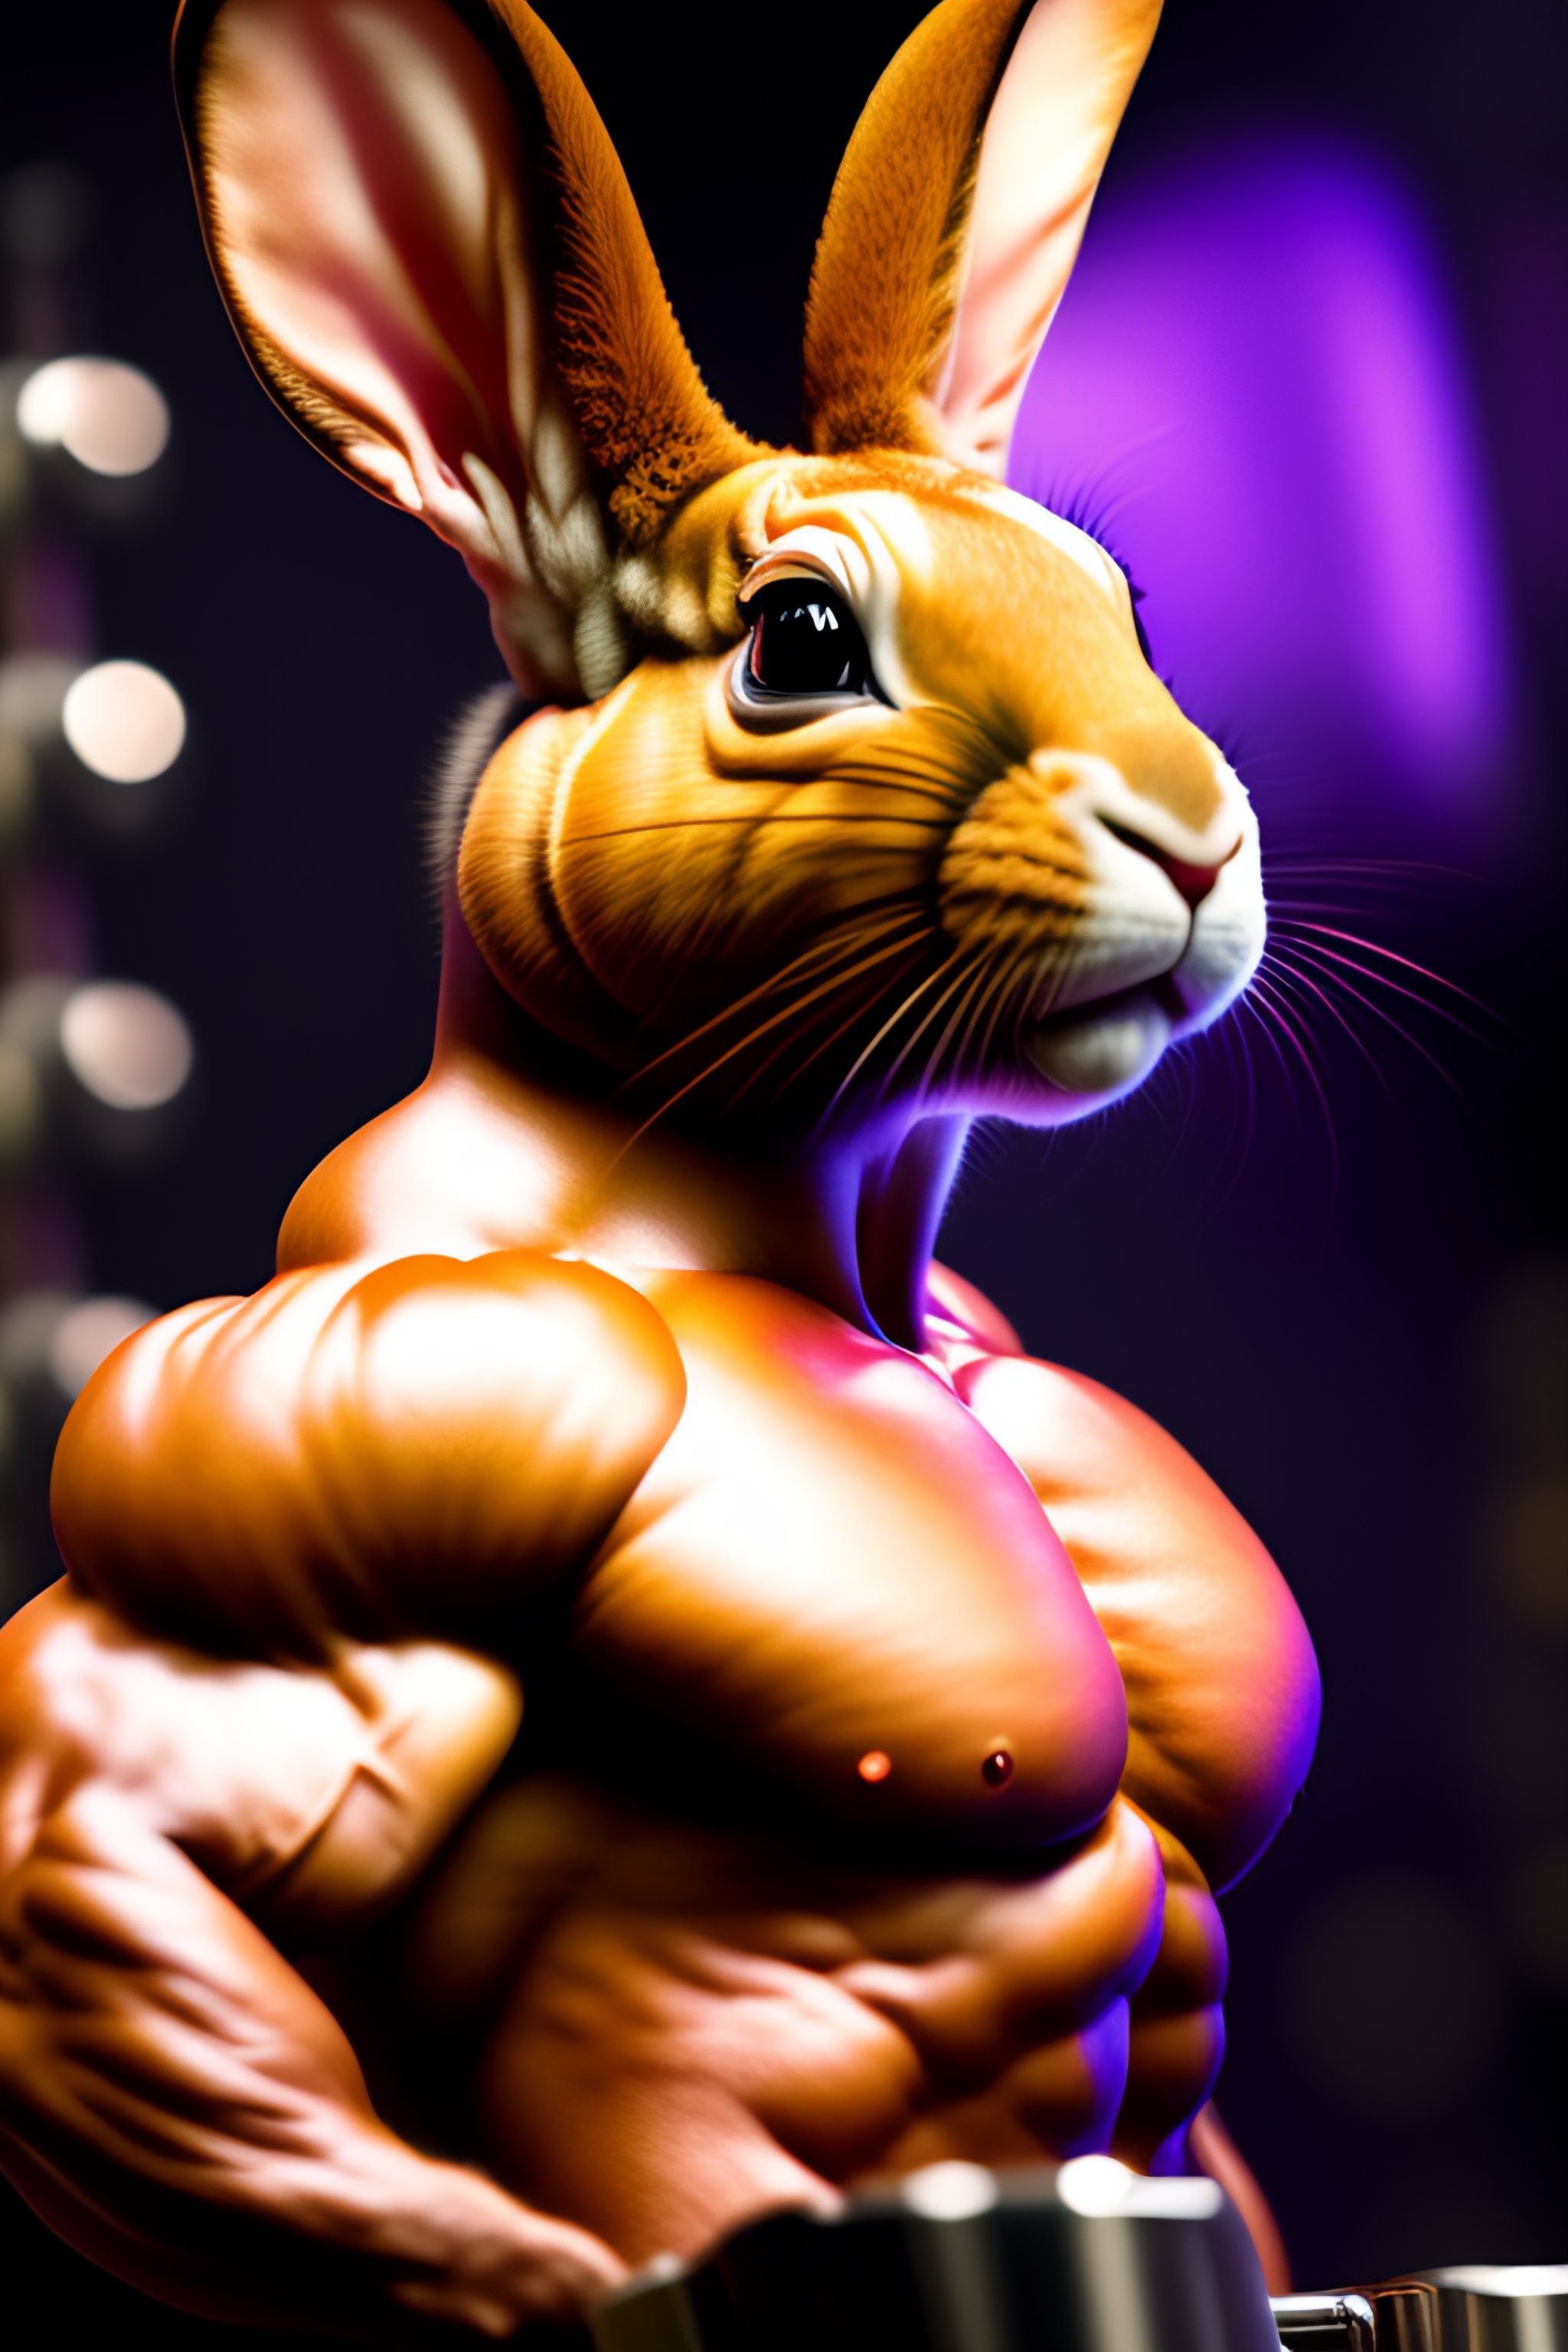 Lexica - A female muscle rabbit